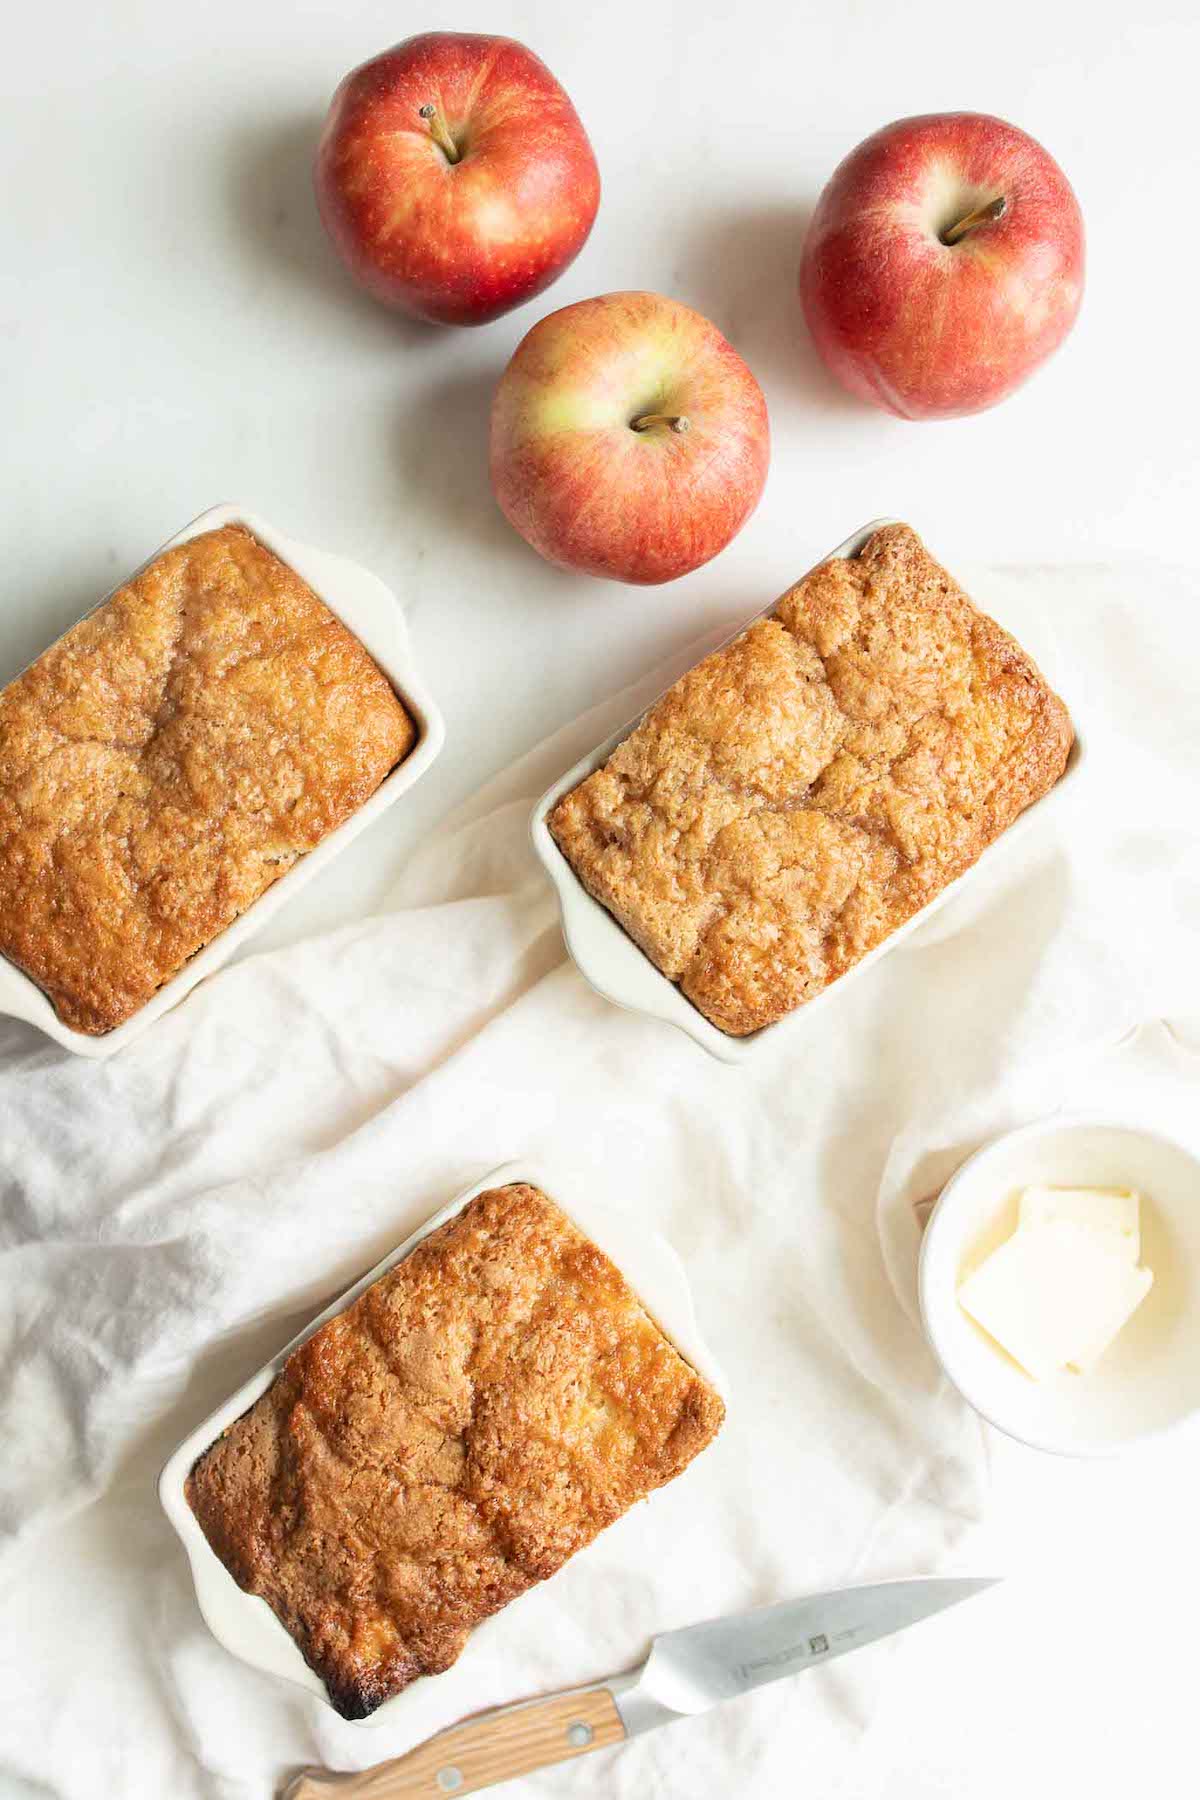 A small loaf pan of apple bread, topped with white icing and surrounded with apples and a linen napkin.